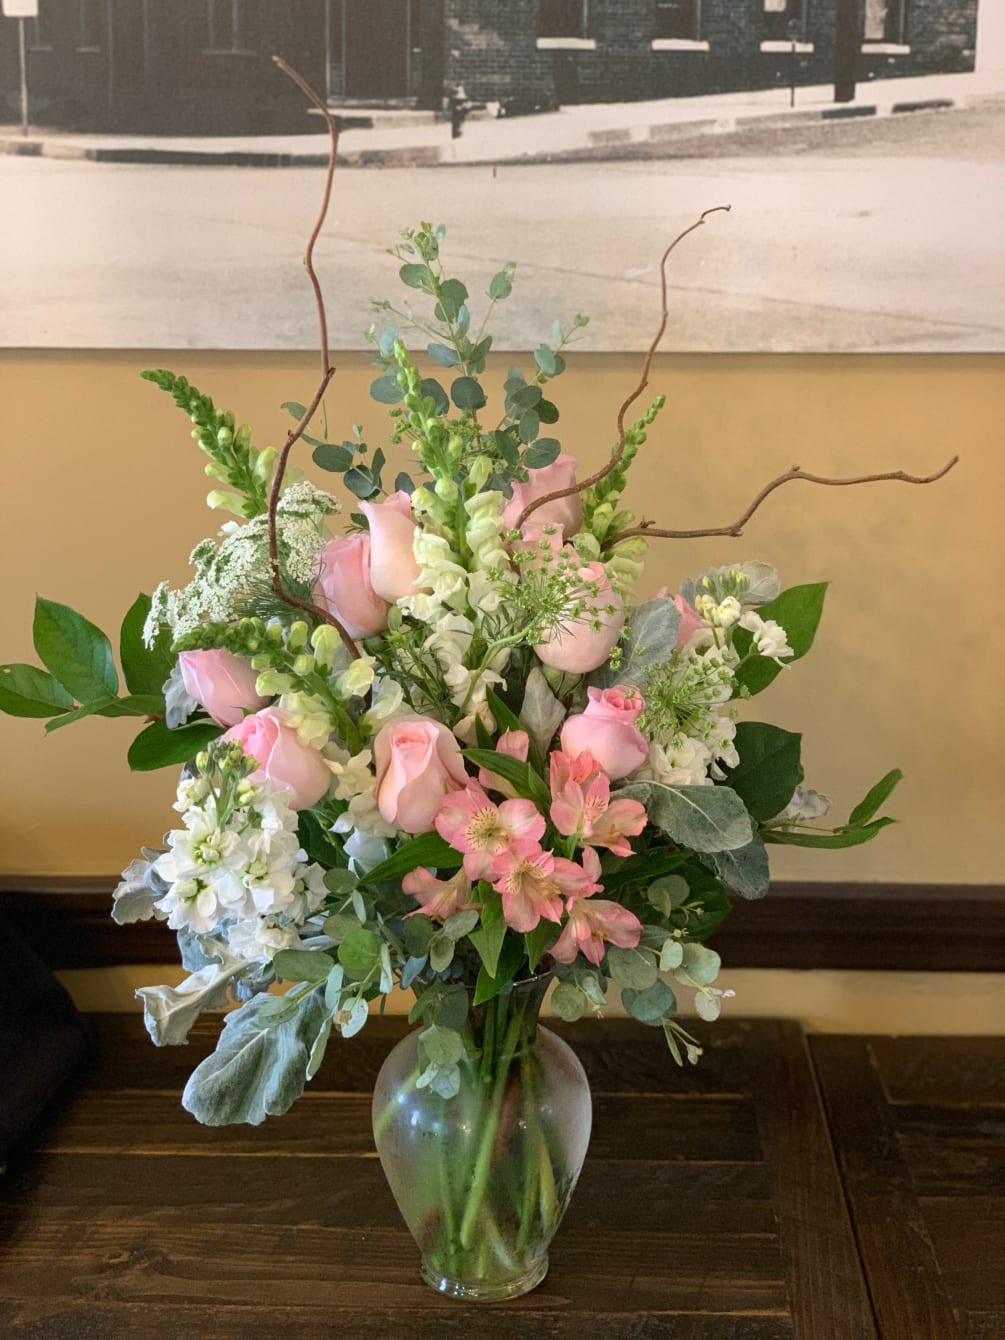 A beautiful arrangement in soft pink and white flowers such as, roses